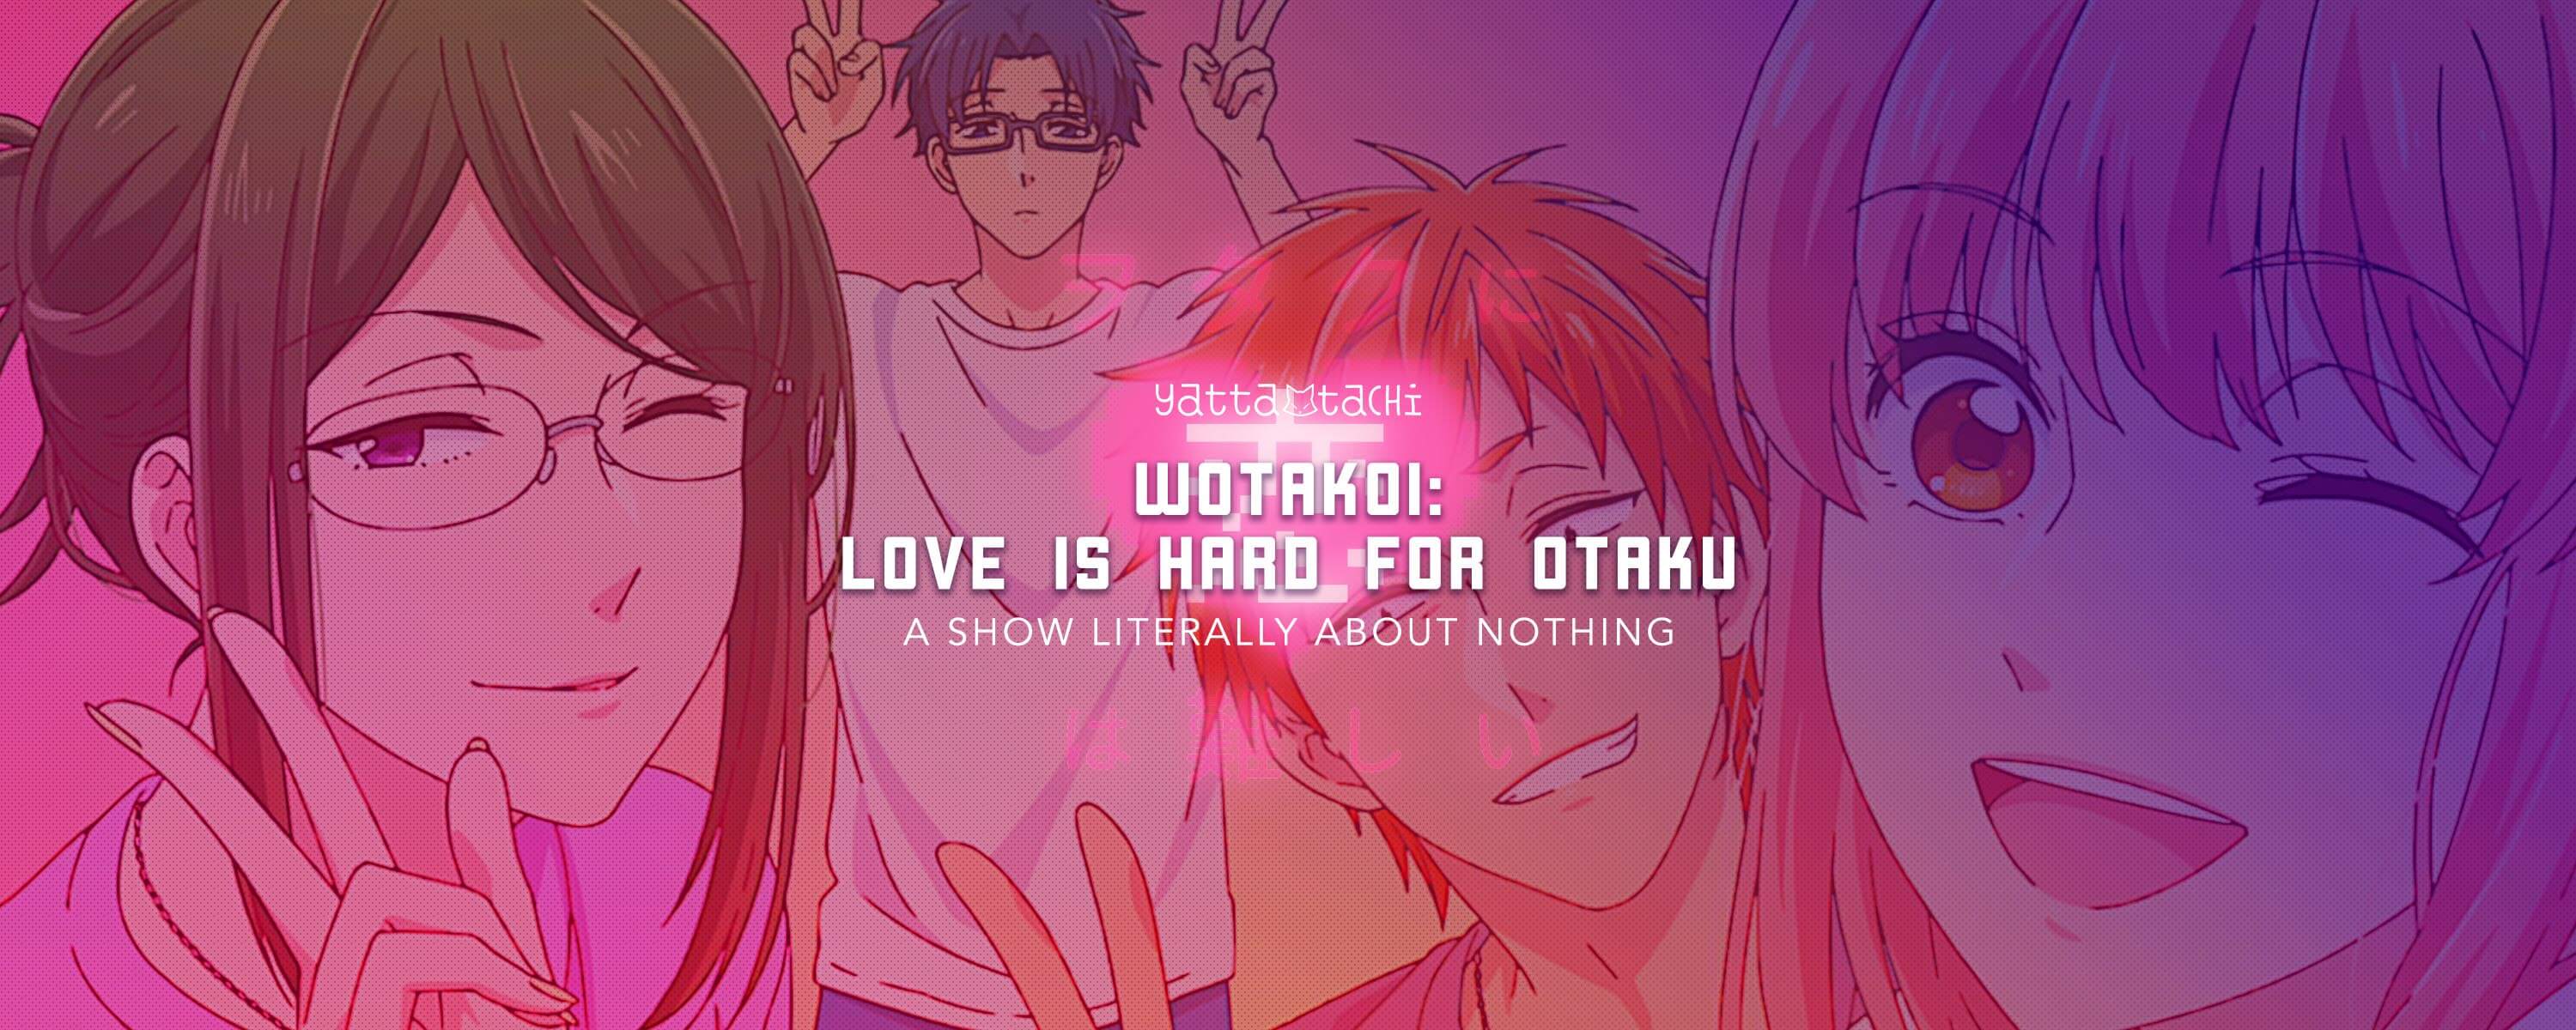 Wotakoi Love Is Hard For Otaku A Show Literally About Nothing